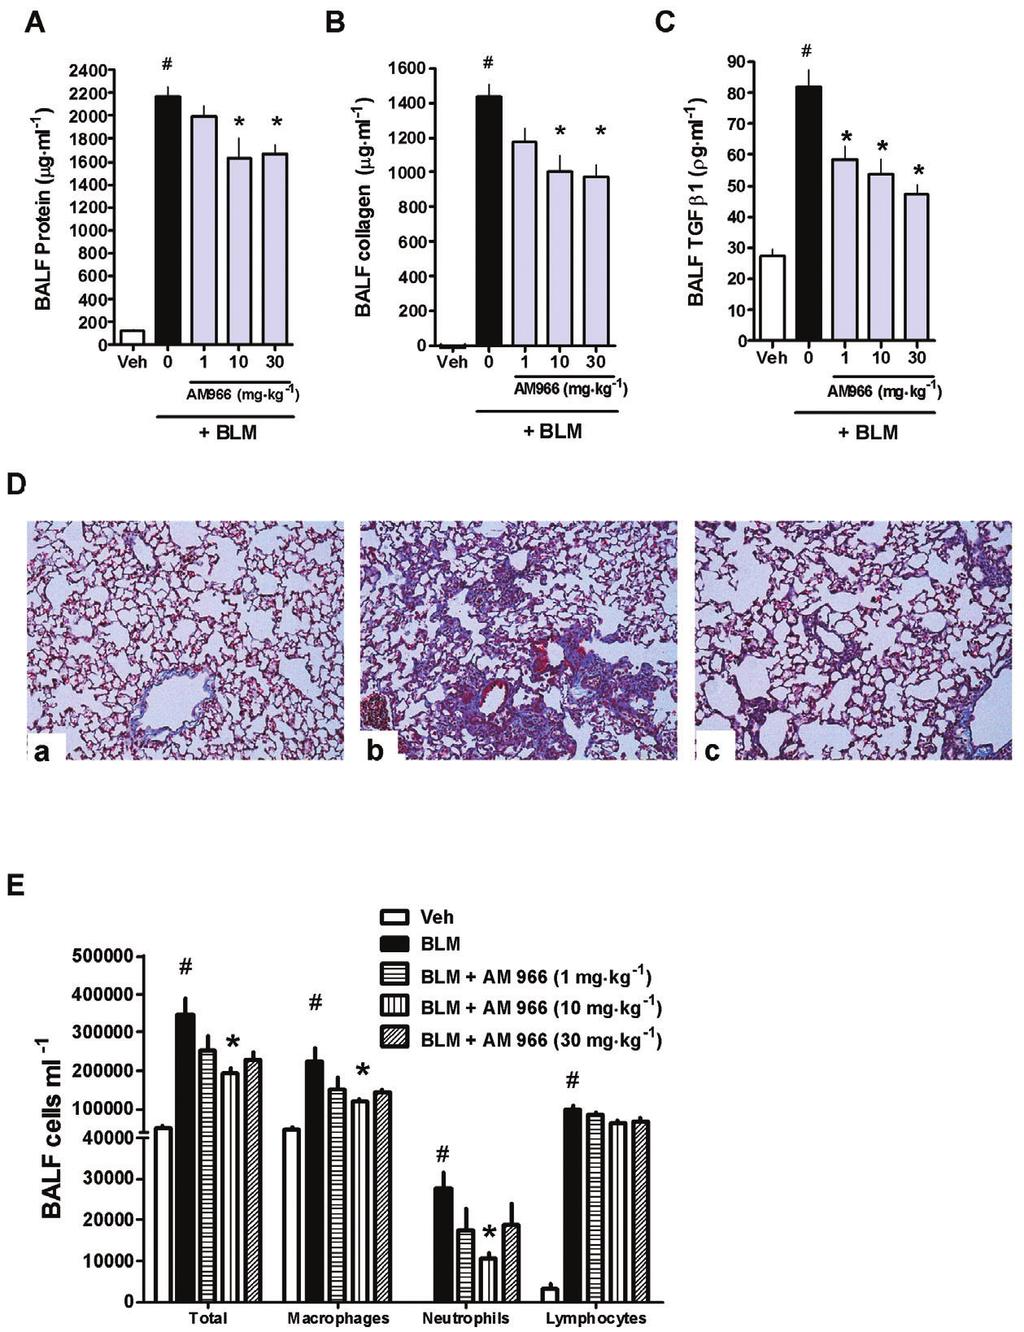 1706 JS Swaney et al Figure 5 AM966 reduces vascular leakage and fibrosis in a 7 day bleomycin model. Mice were given intratracheal bleomycin sulfate (BLM; 3.0 units kg -1 ) or saline vehicle (Veh.